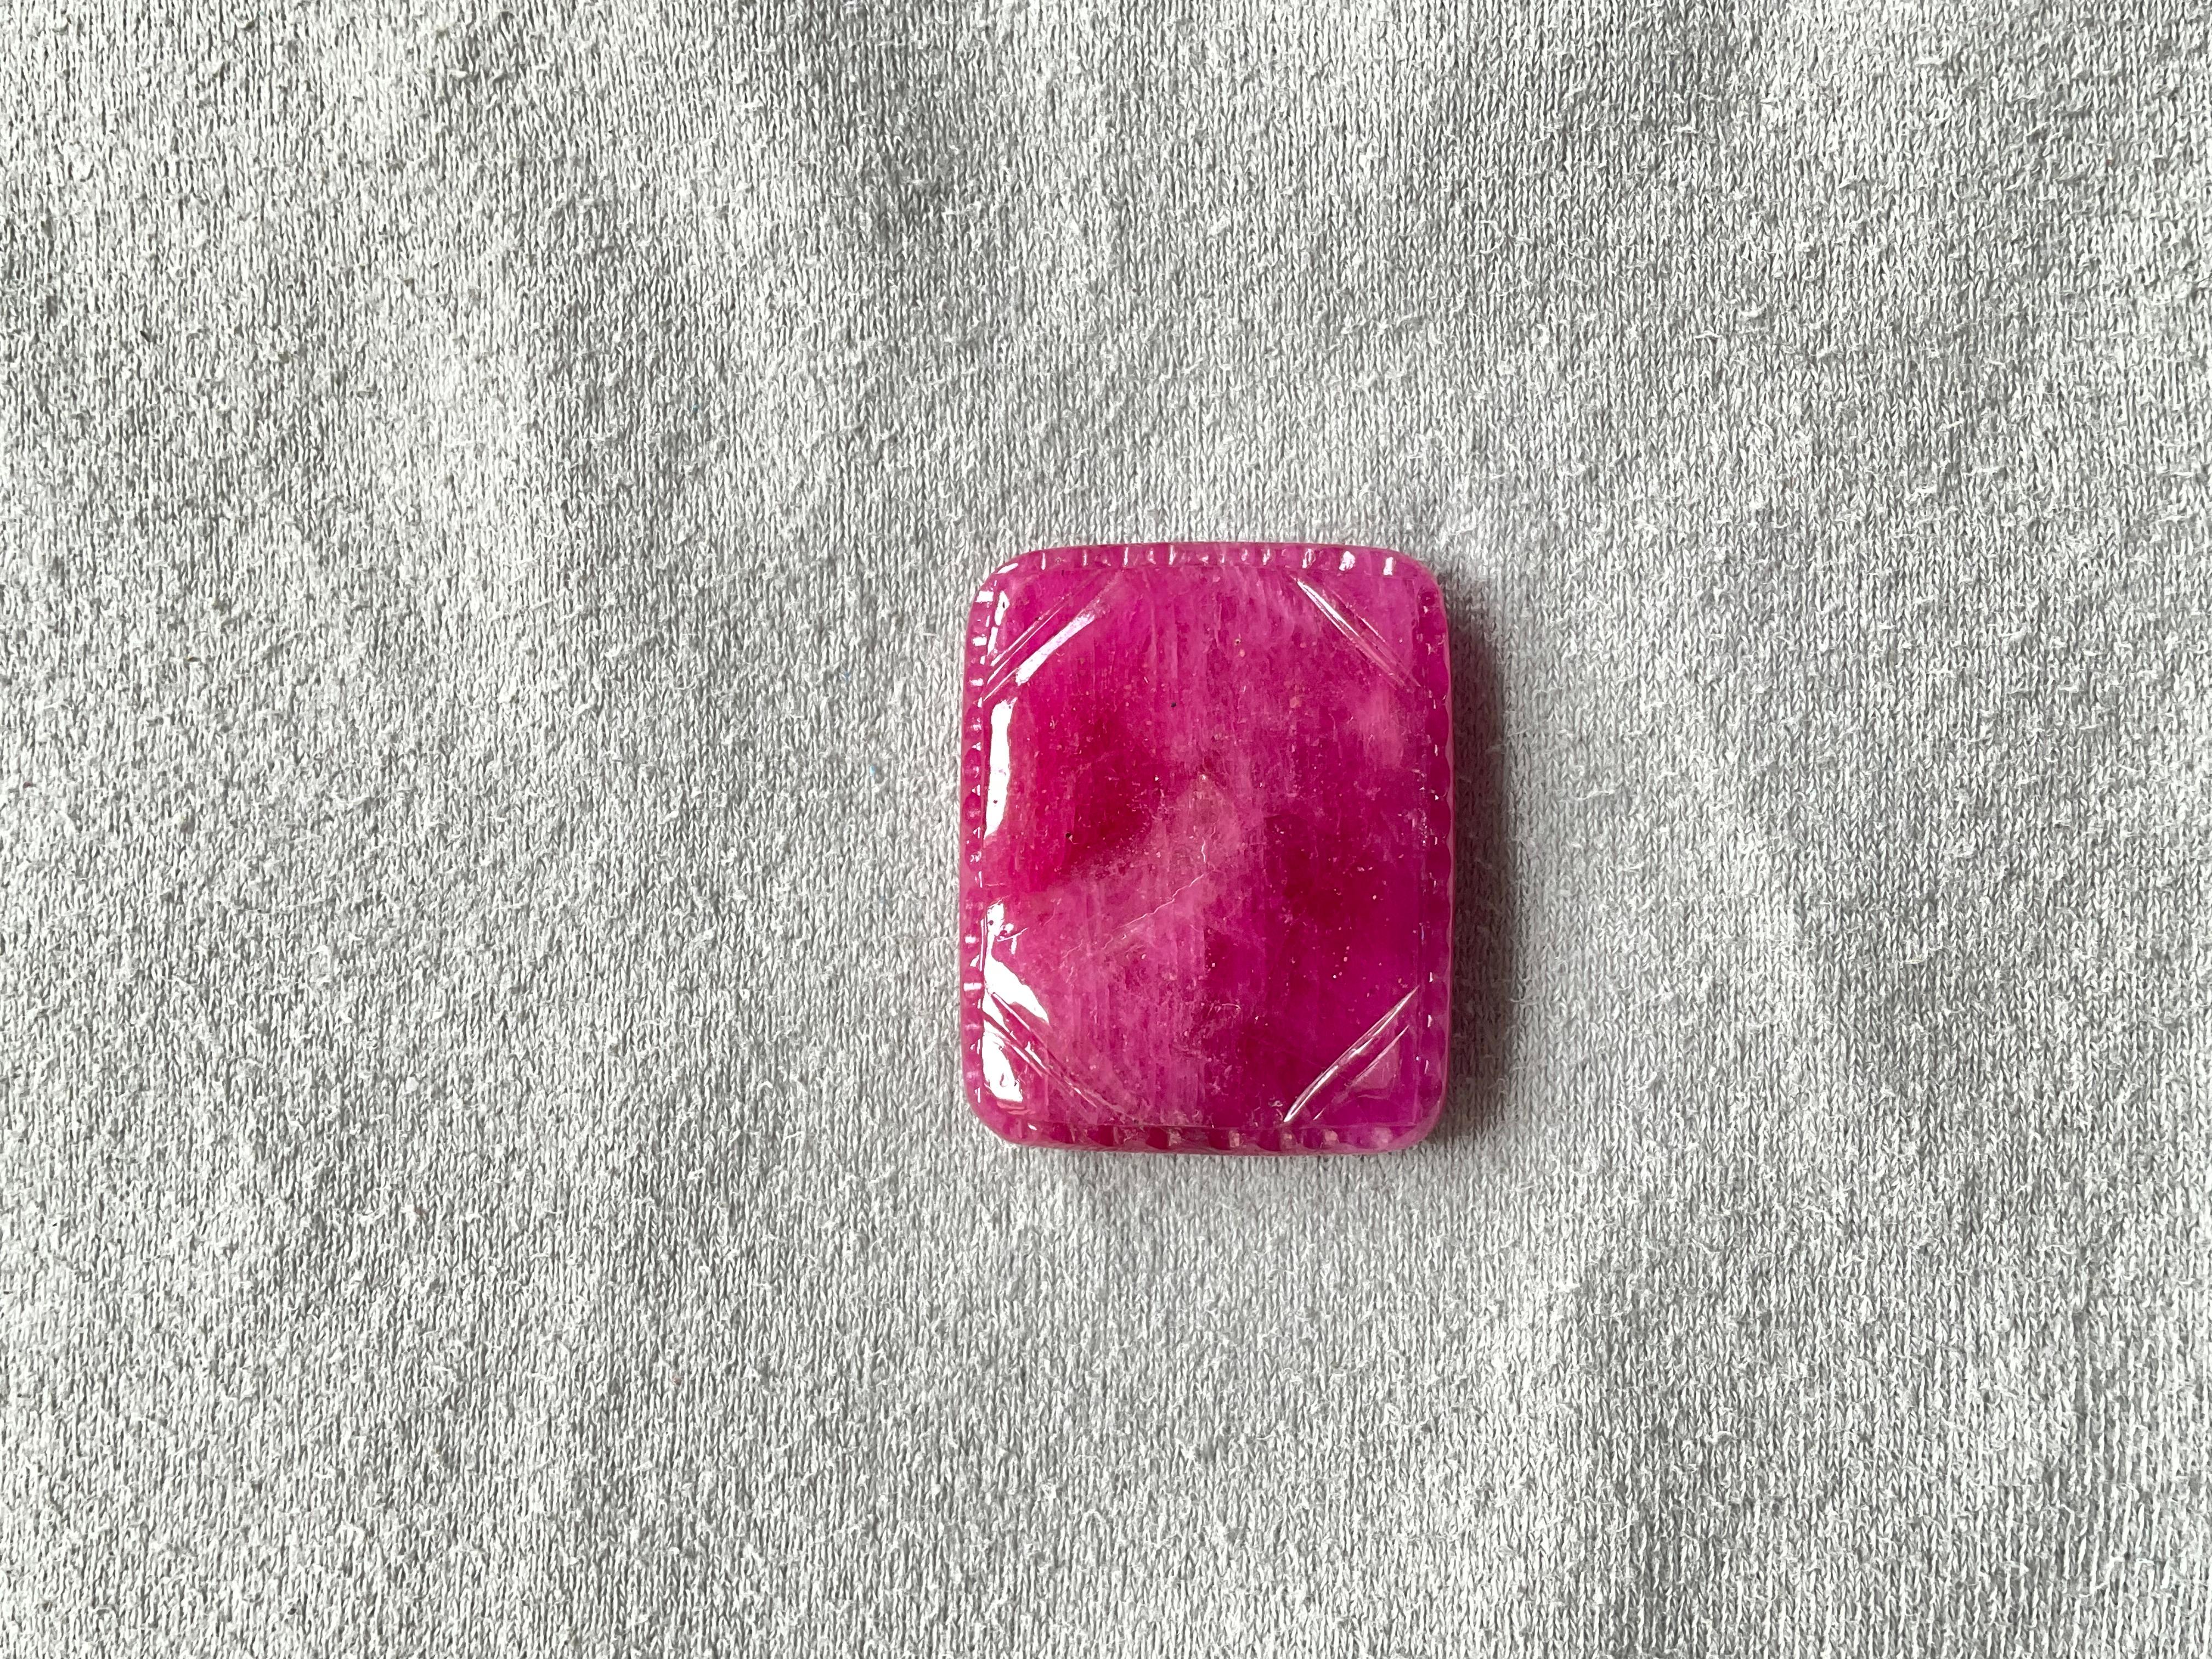 Art Deco Certified 89.35 Carats Ruby Mozambique Carved Specimen Heated Natural Gemstone For Sale